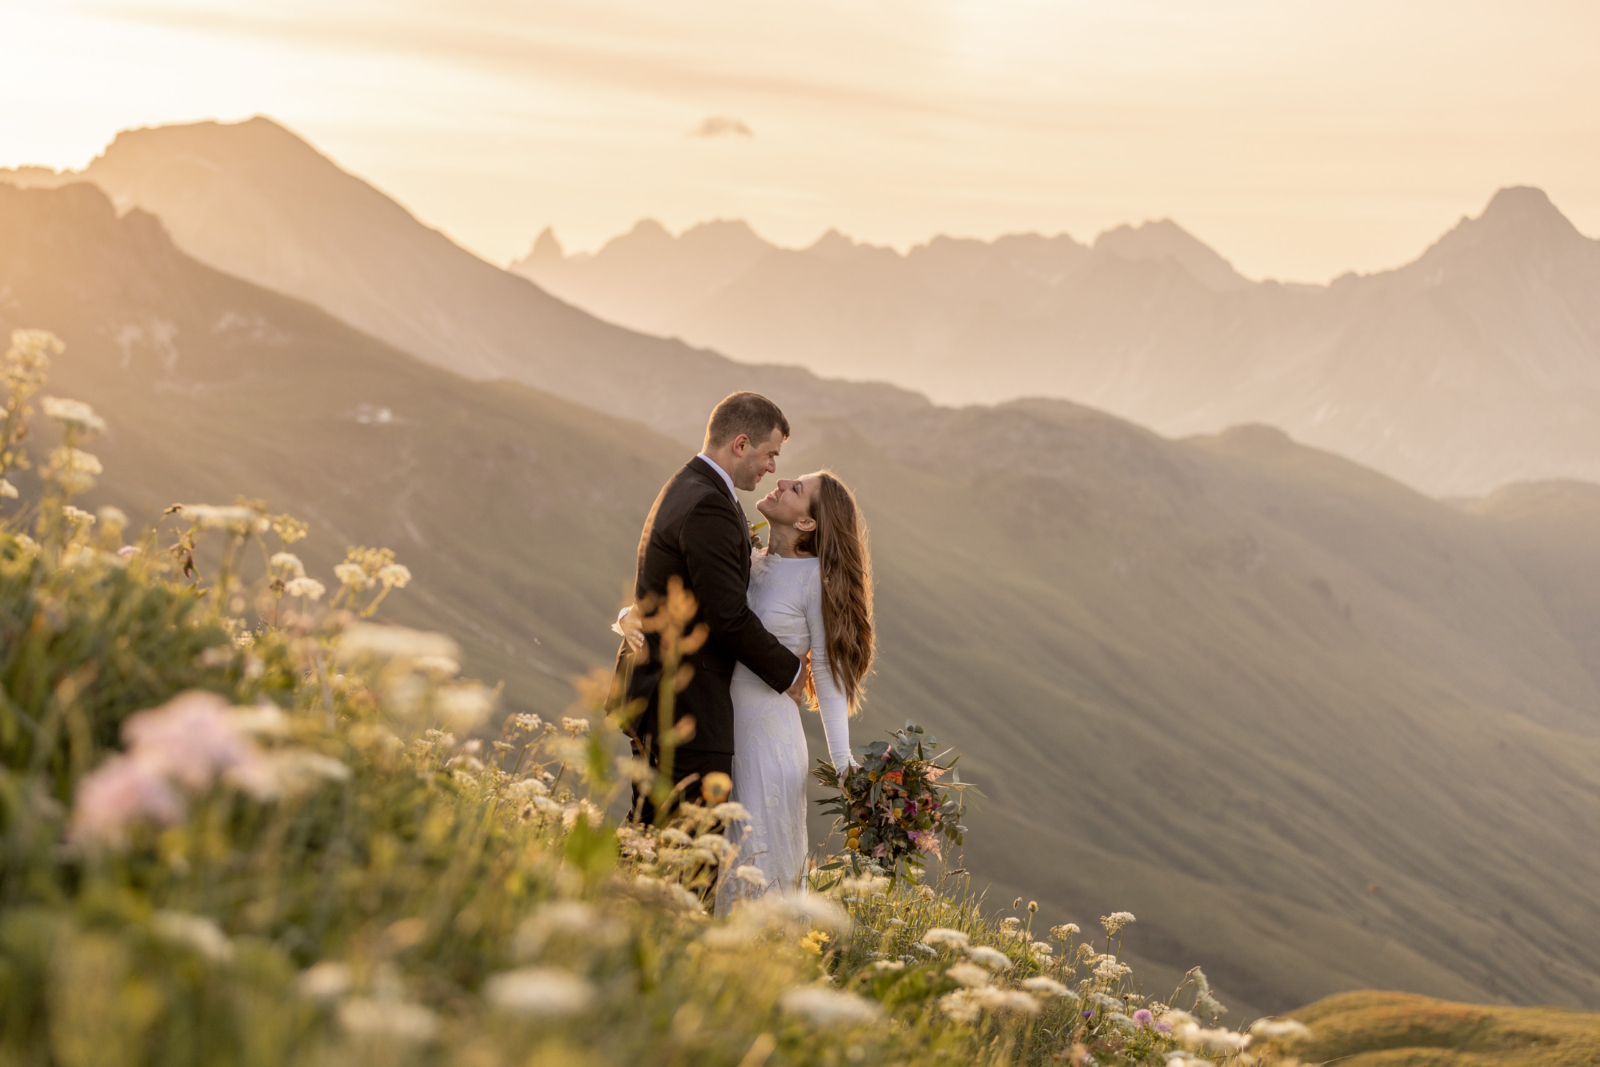 A Sunrise Wedding Amidst the Blooming Wildflowers in the Alps